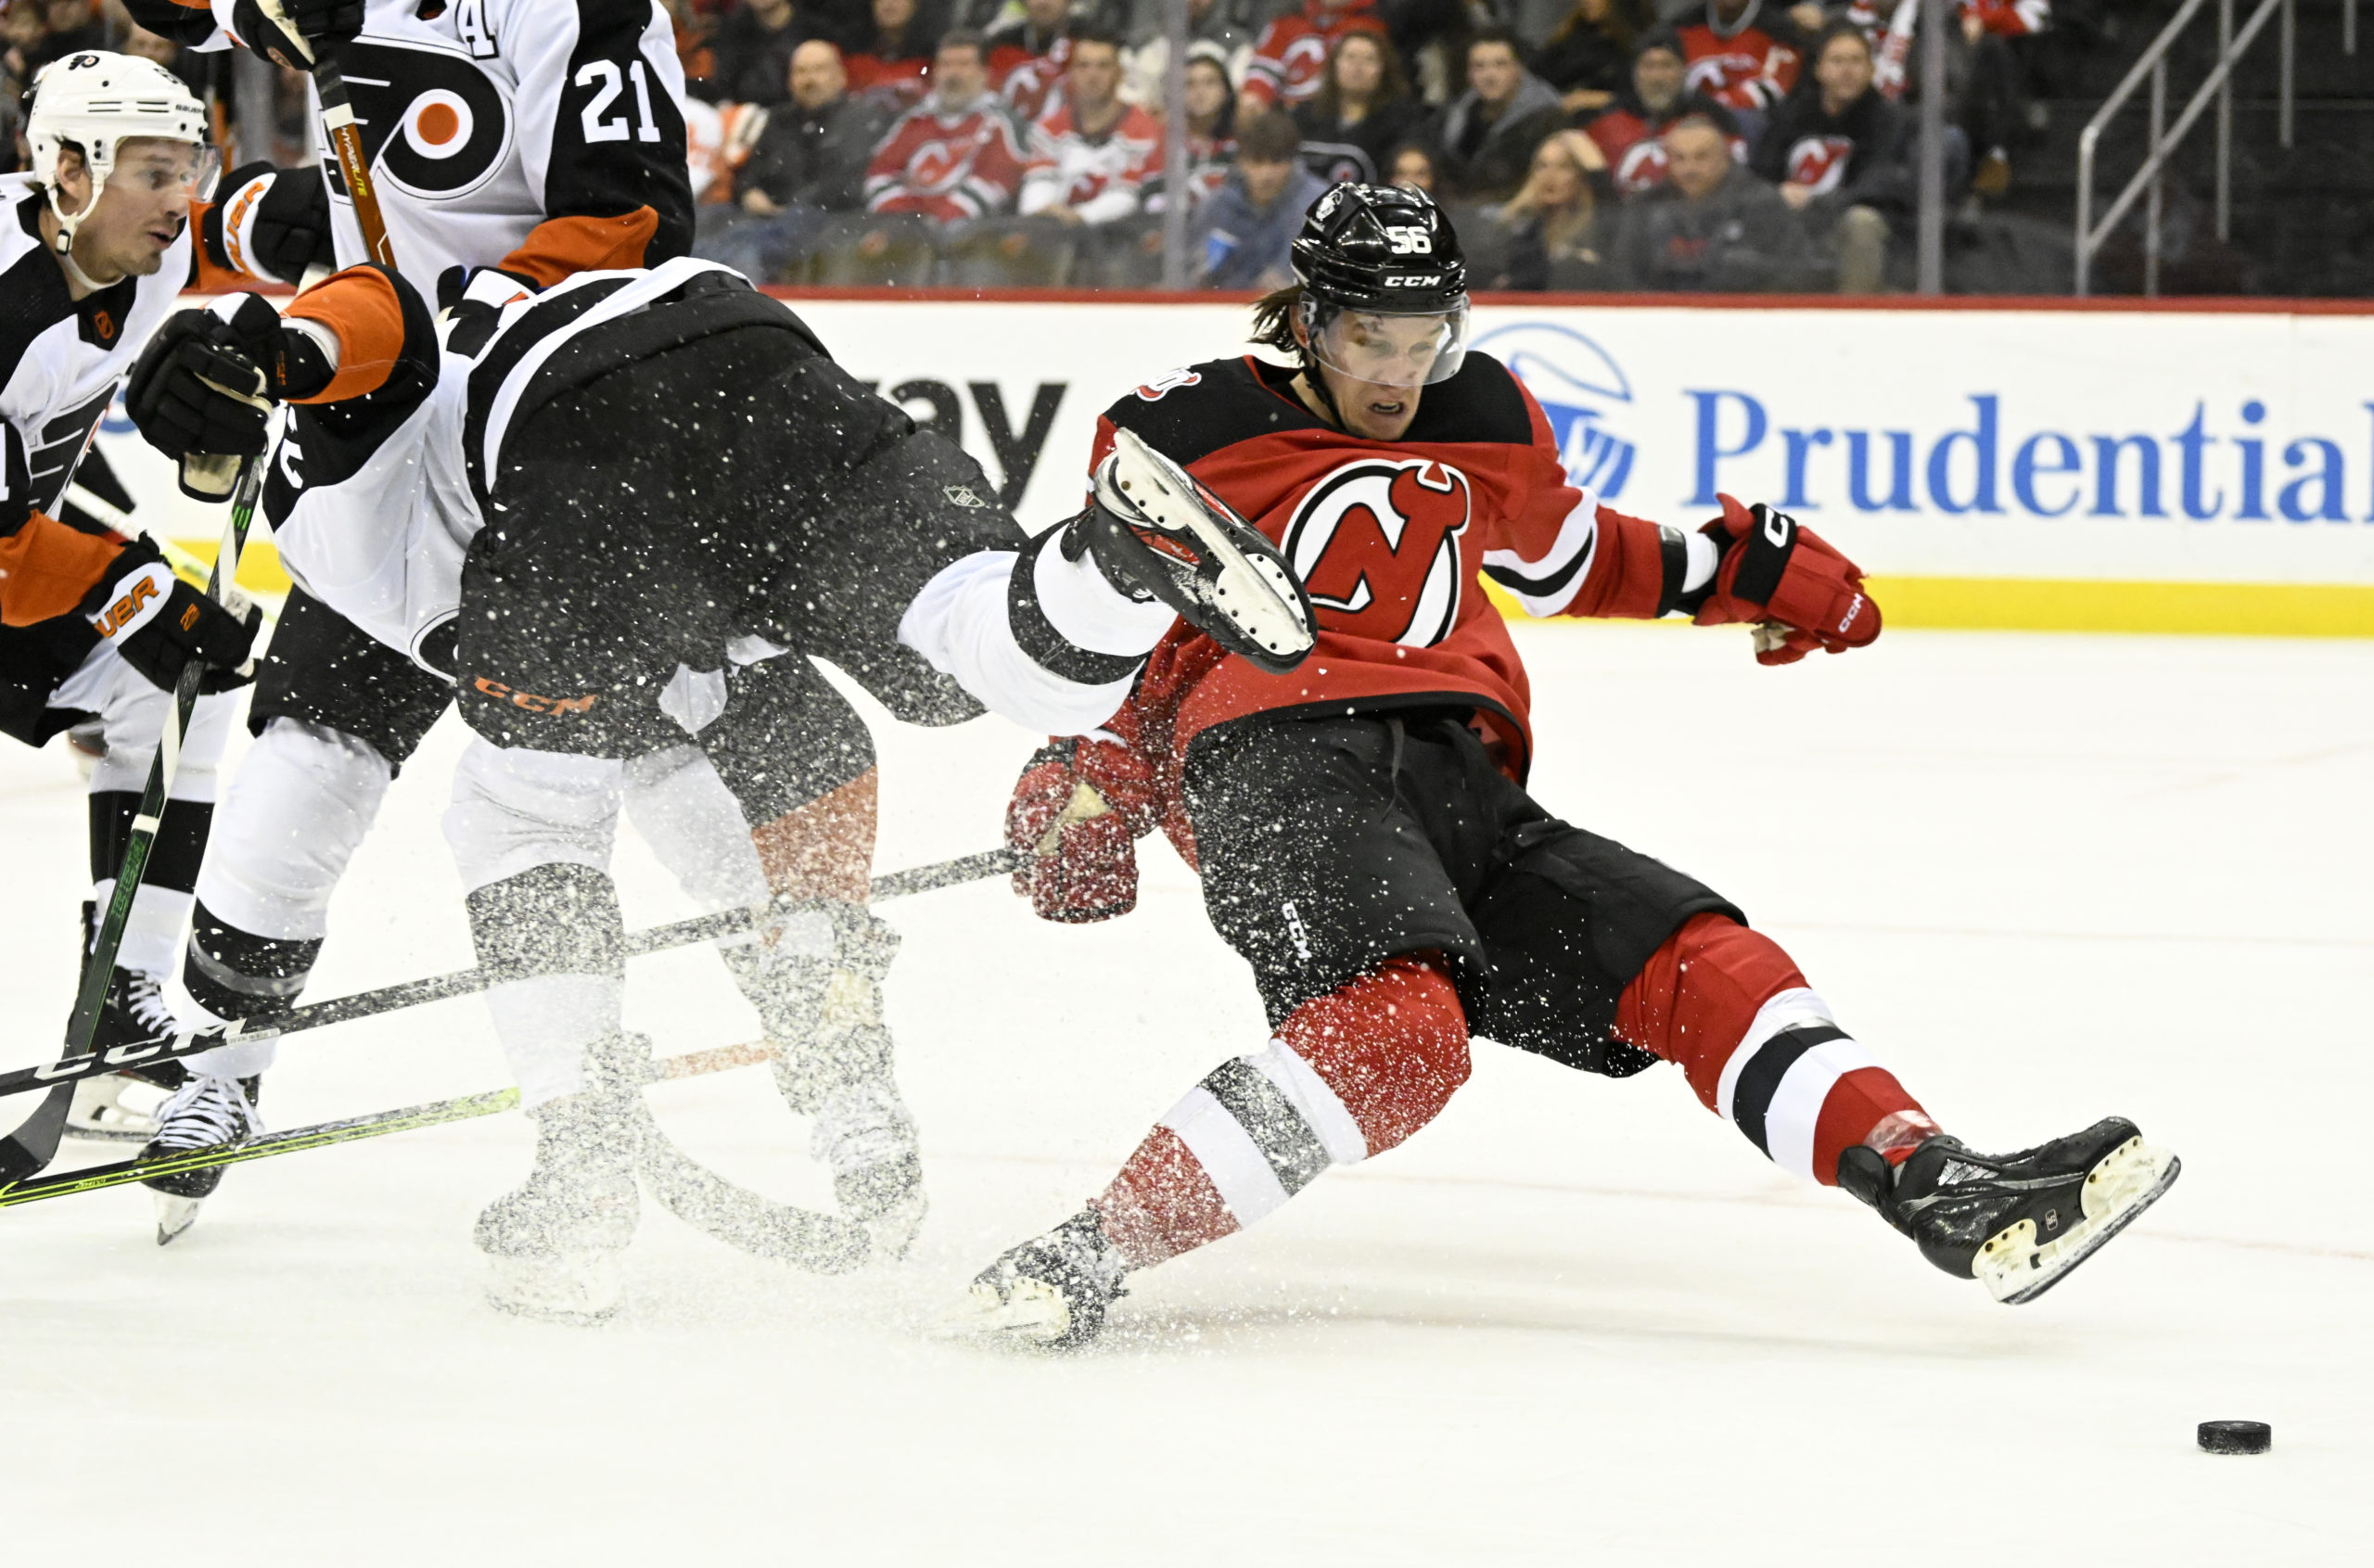 New Jersey Devils Top-9 This Season is Tops in the NHL